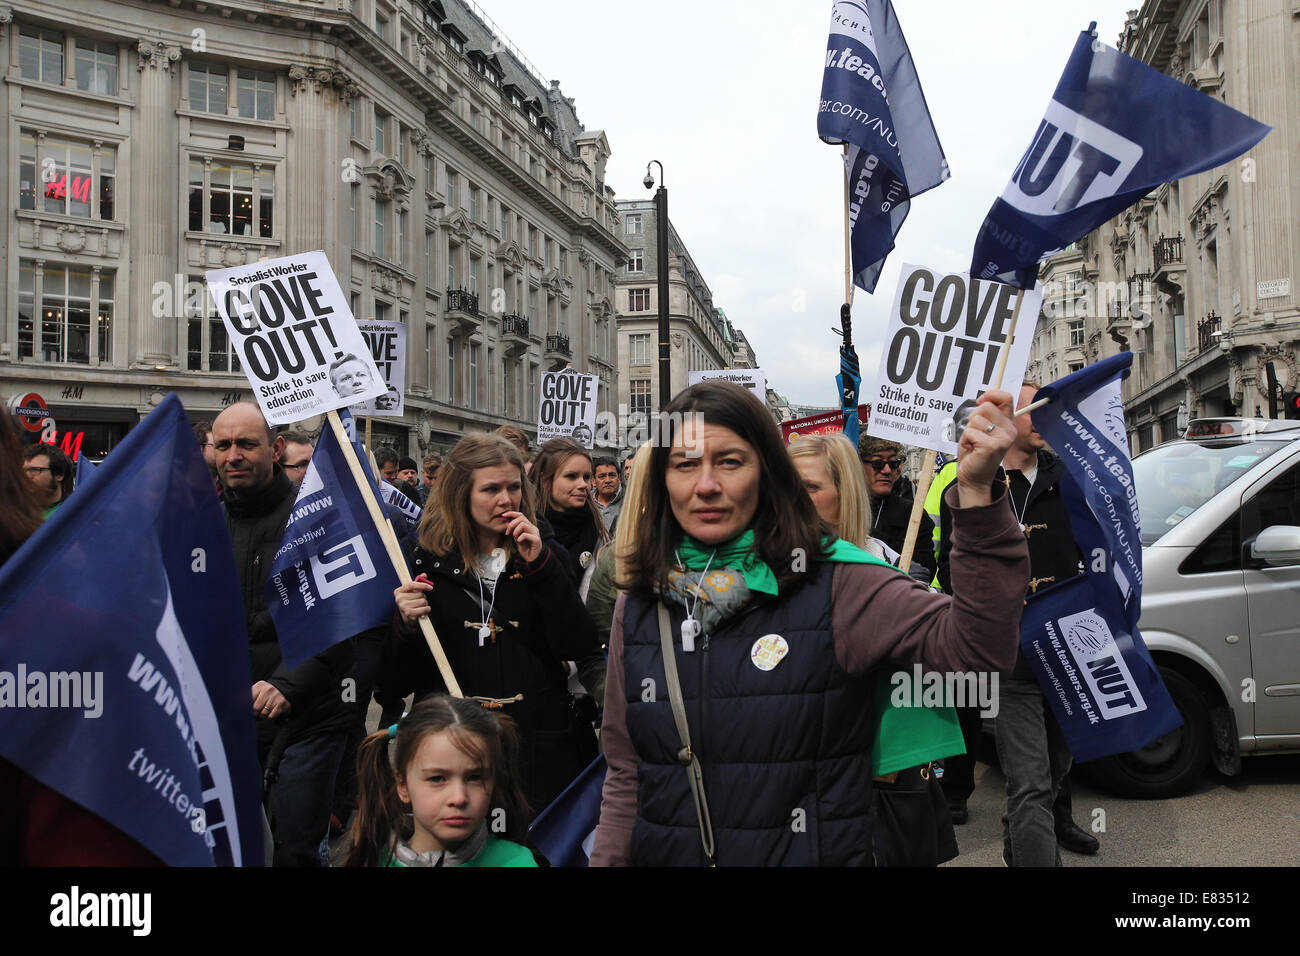 Teachers march in Central London during a national day of strike action. They are protesting against education reforms and working conditions brought about by Michael Gove's policies. They angry at unfair pensions changes and excessive workload/bureaucracy and demand better pay.  Featuring: Demonstrators,Protesters Where: London, United Kingdom When: 26 Mar 2014 Stock Photo